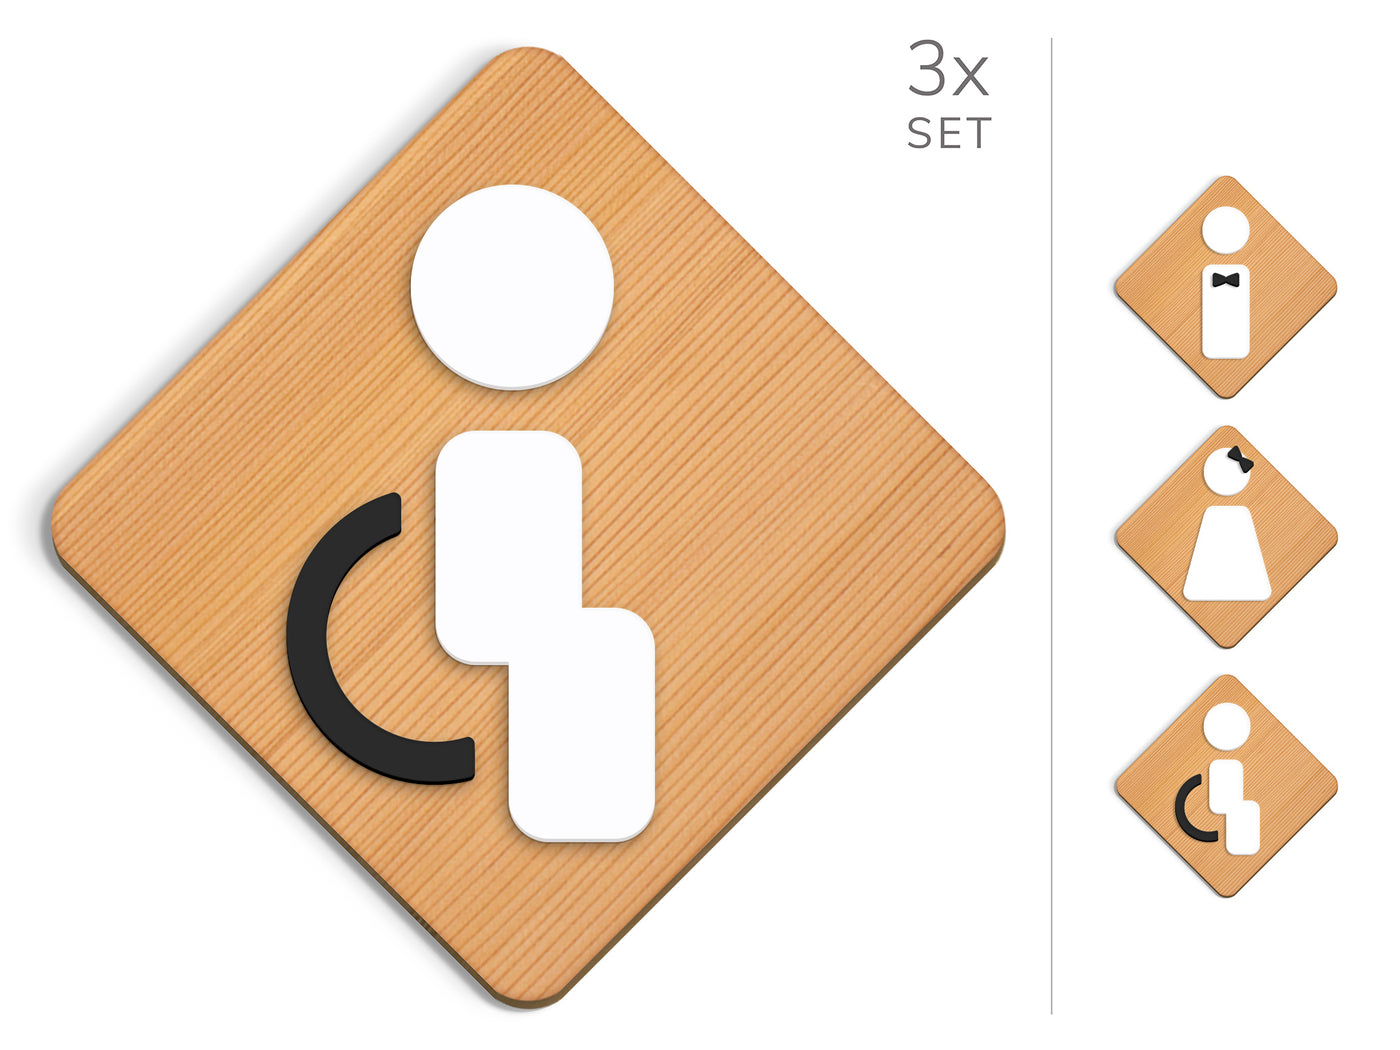 Styled knot, 3x Rhombus Base - Restroom Signs Set - Man, Woman, Disabled